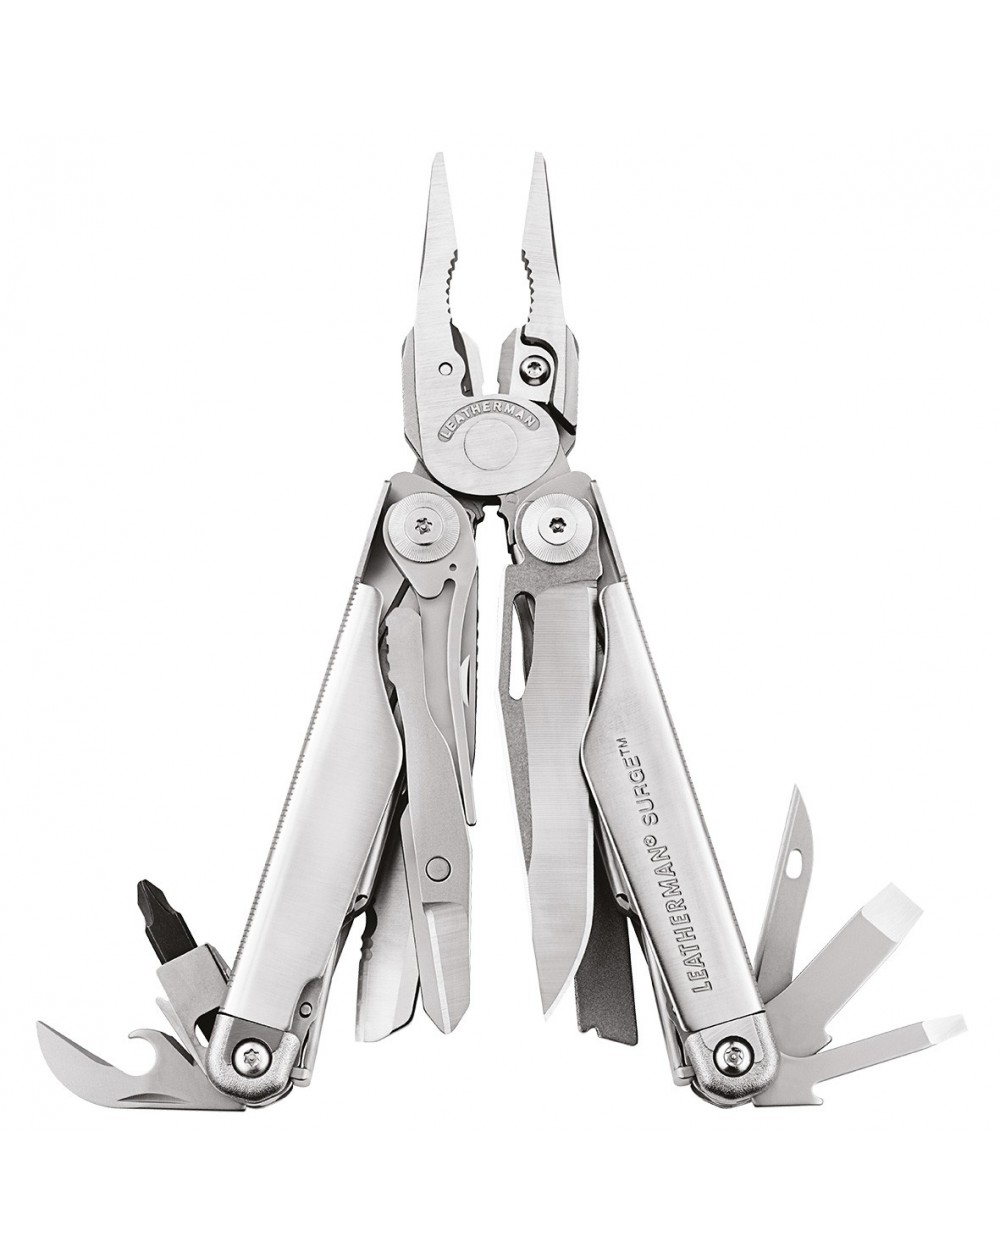 leatherman-pince-multifonctions-surge-830165-1